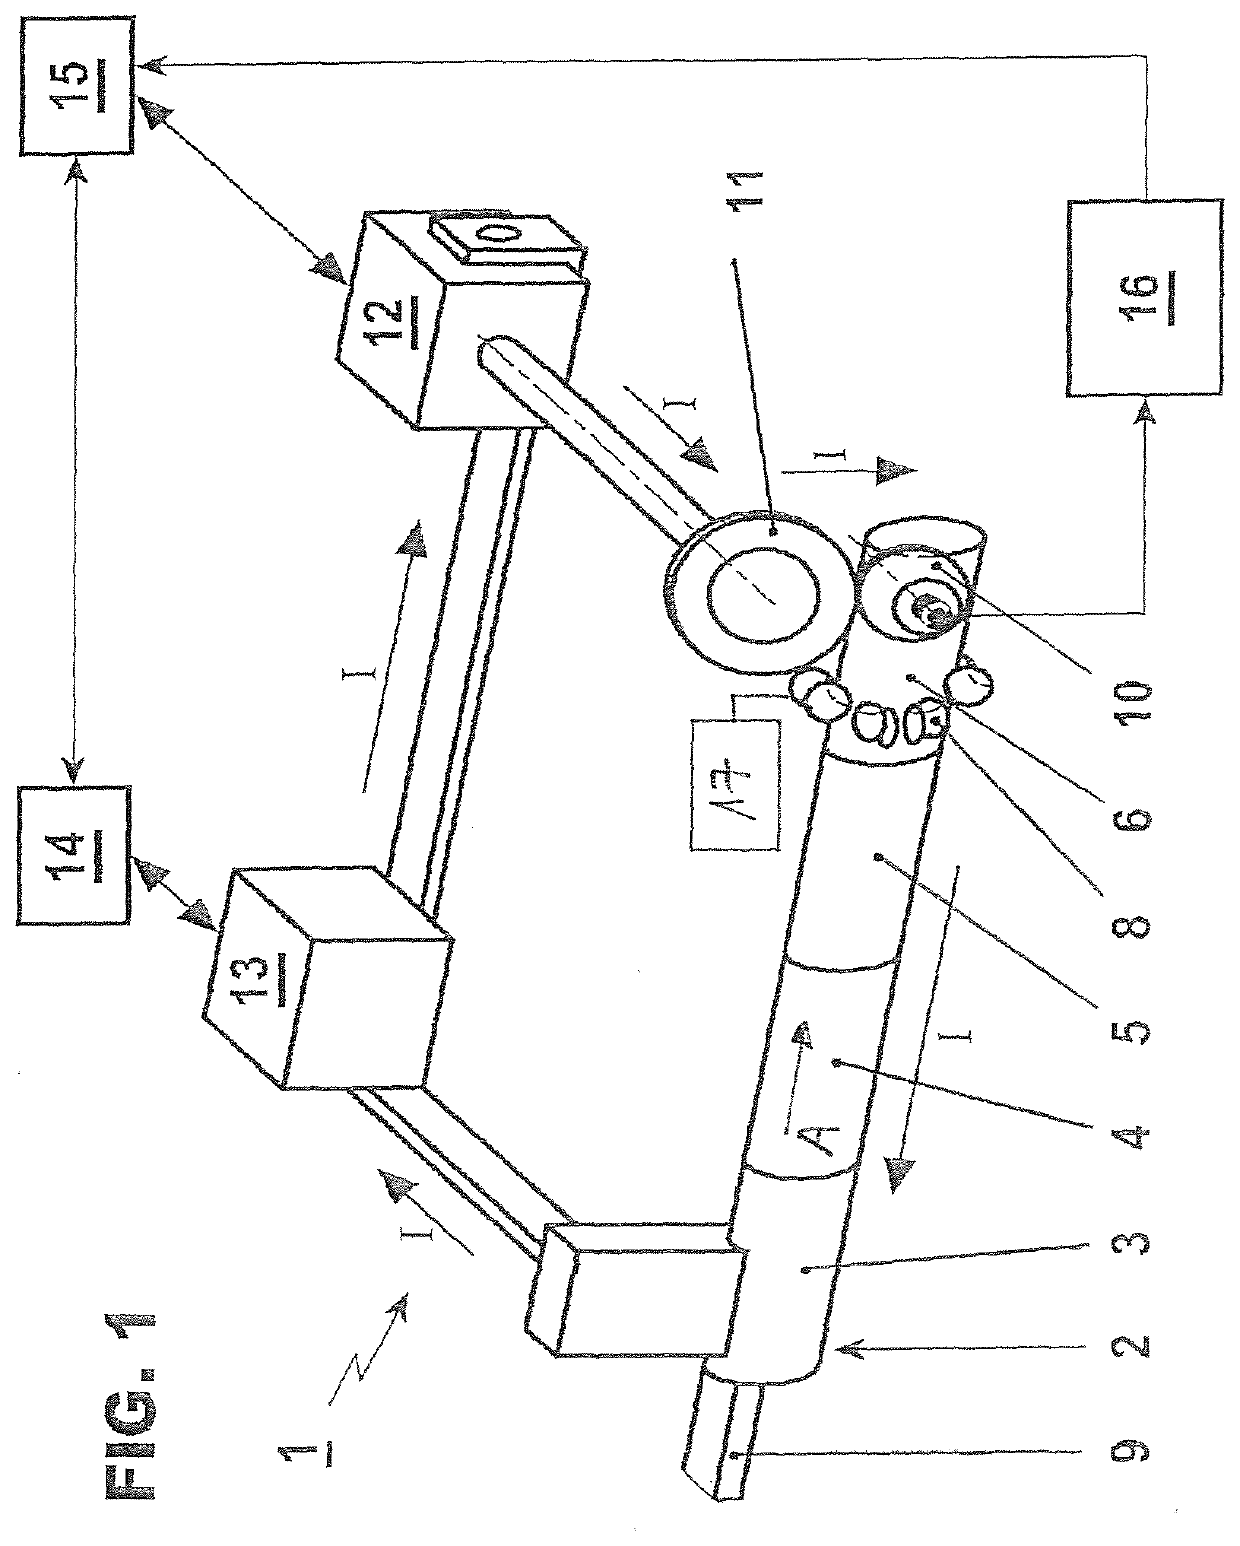 Method and device for roll seam welding container shells